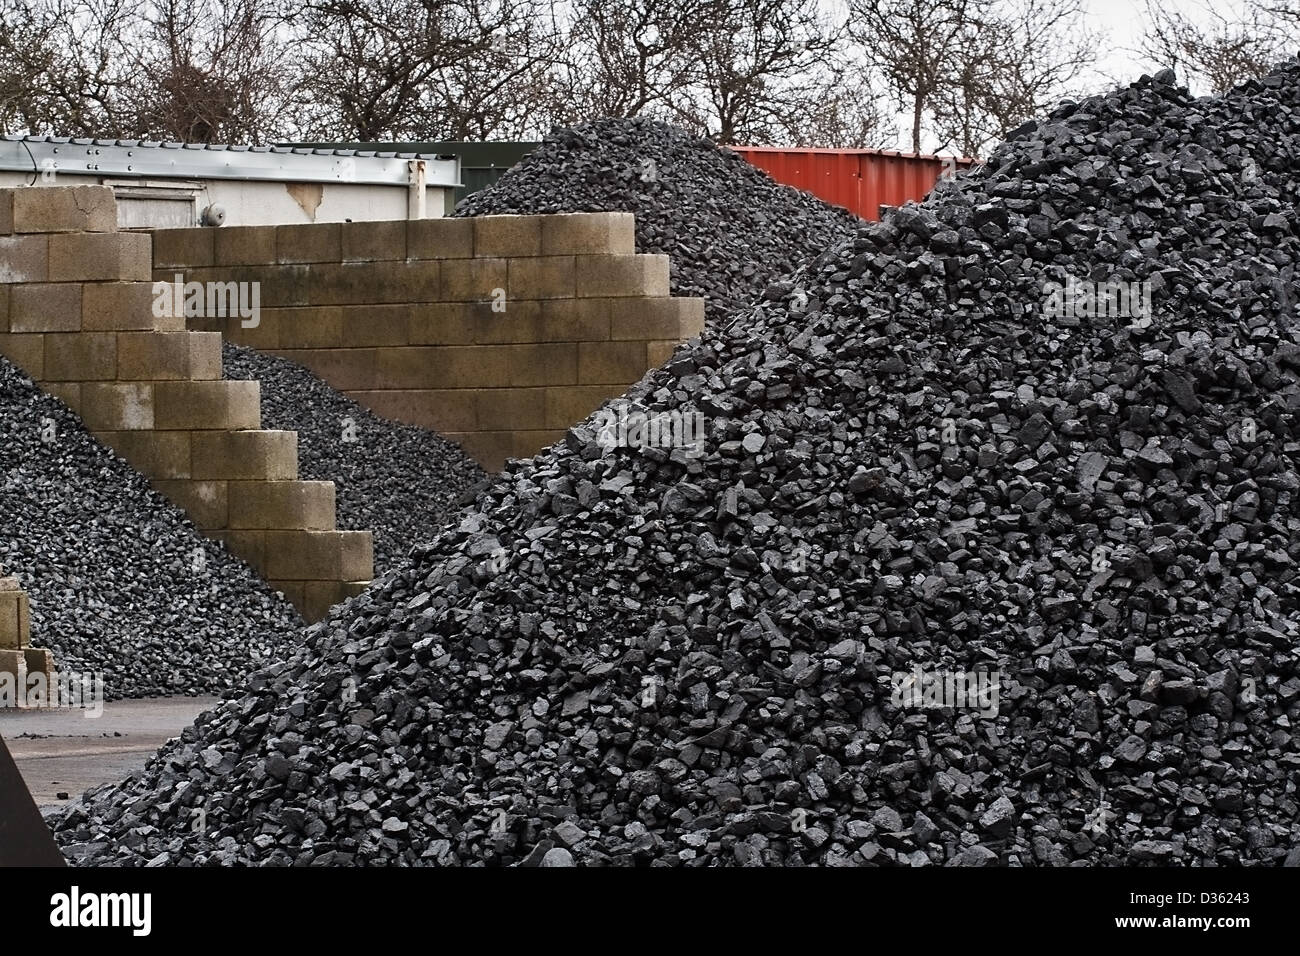 Coal yard with supply in heaps for domestic use Stock Photo